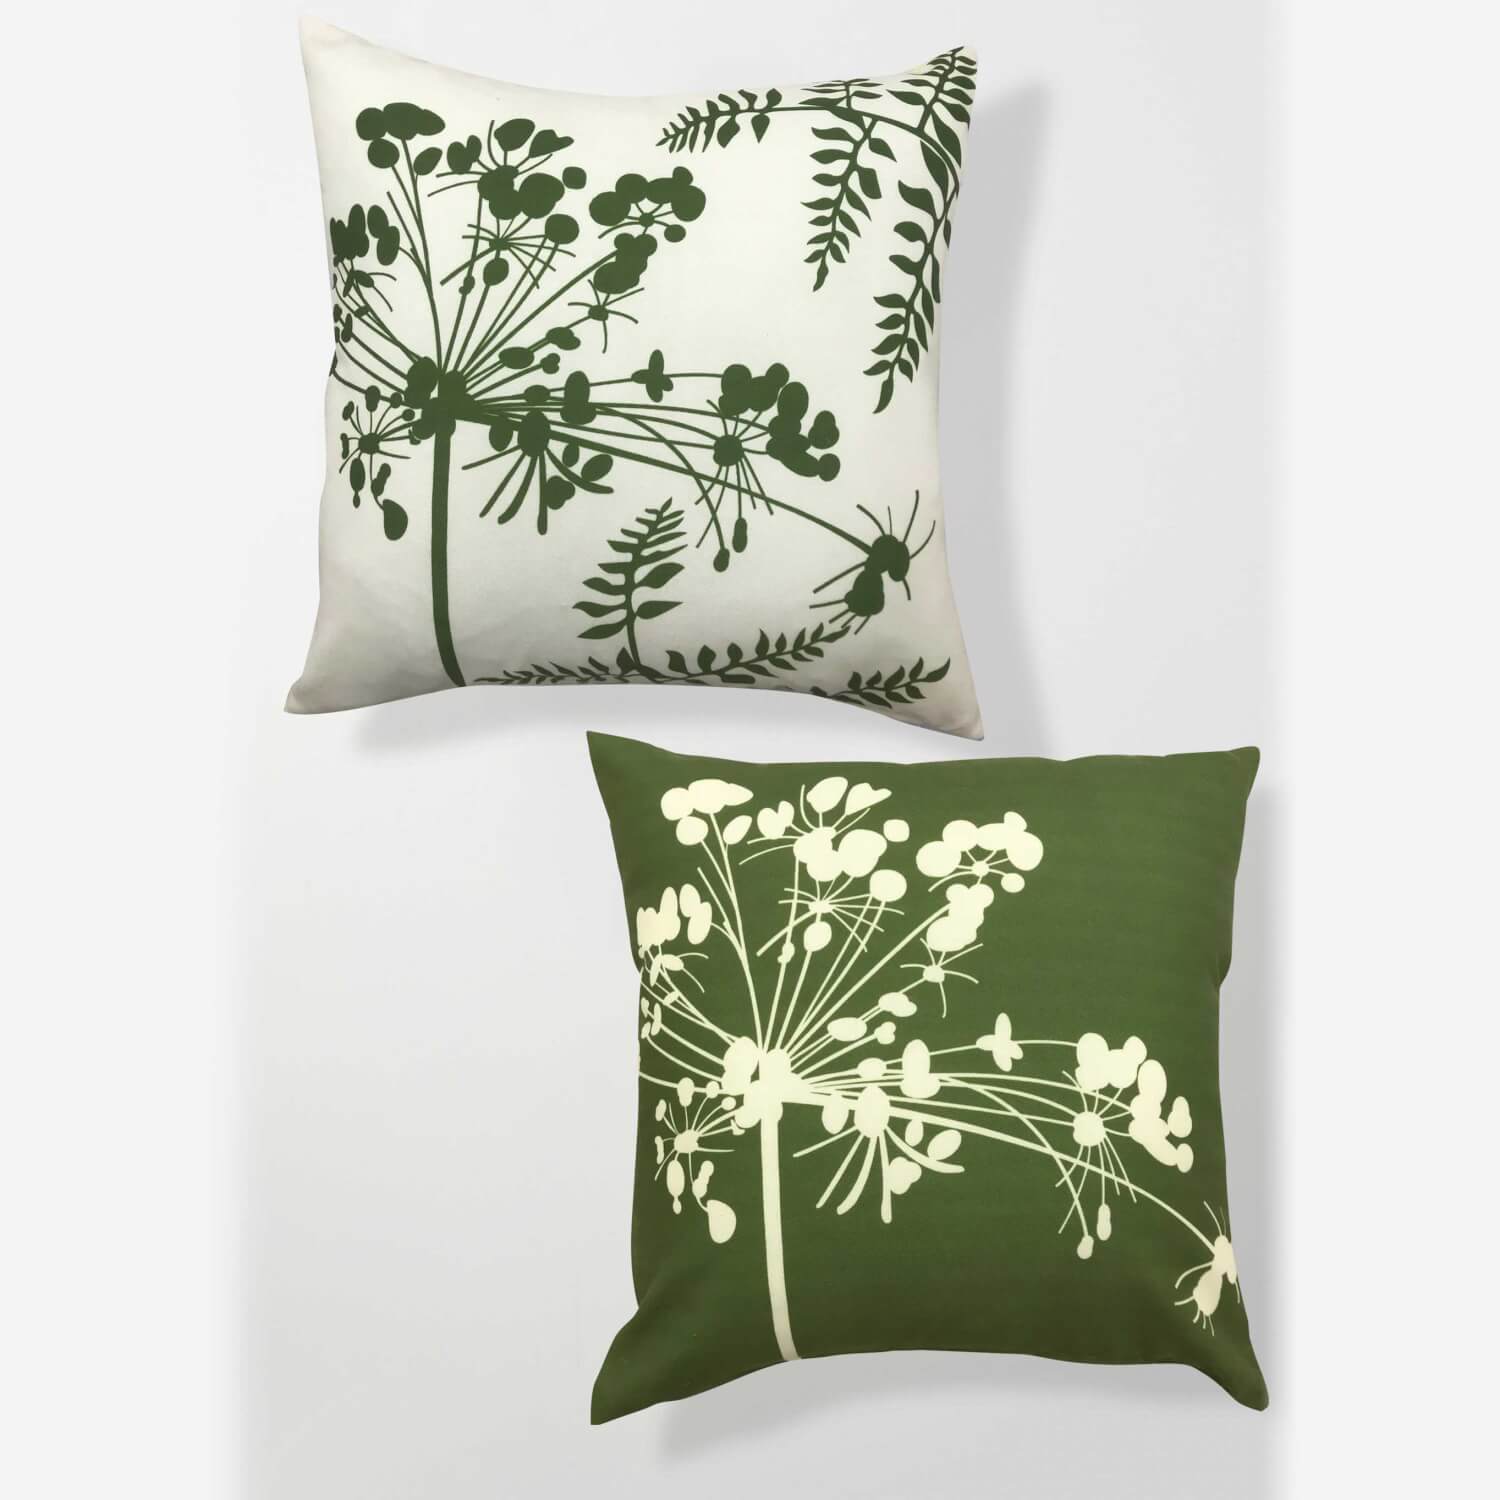 both styles of floral pillows on a white background